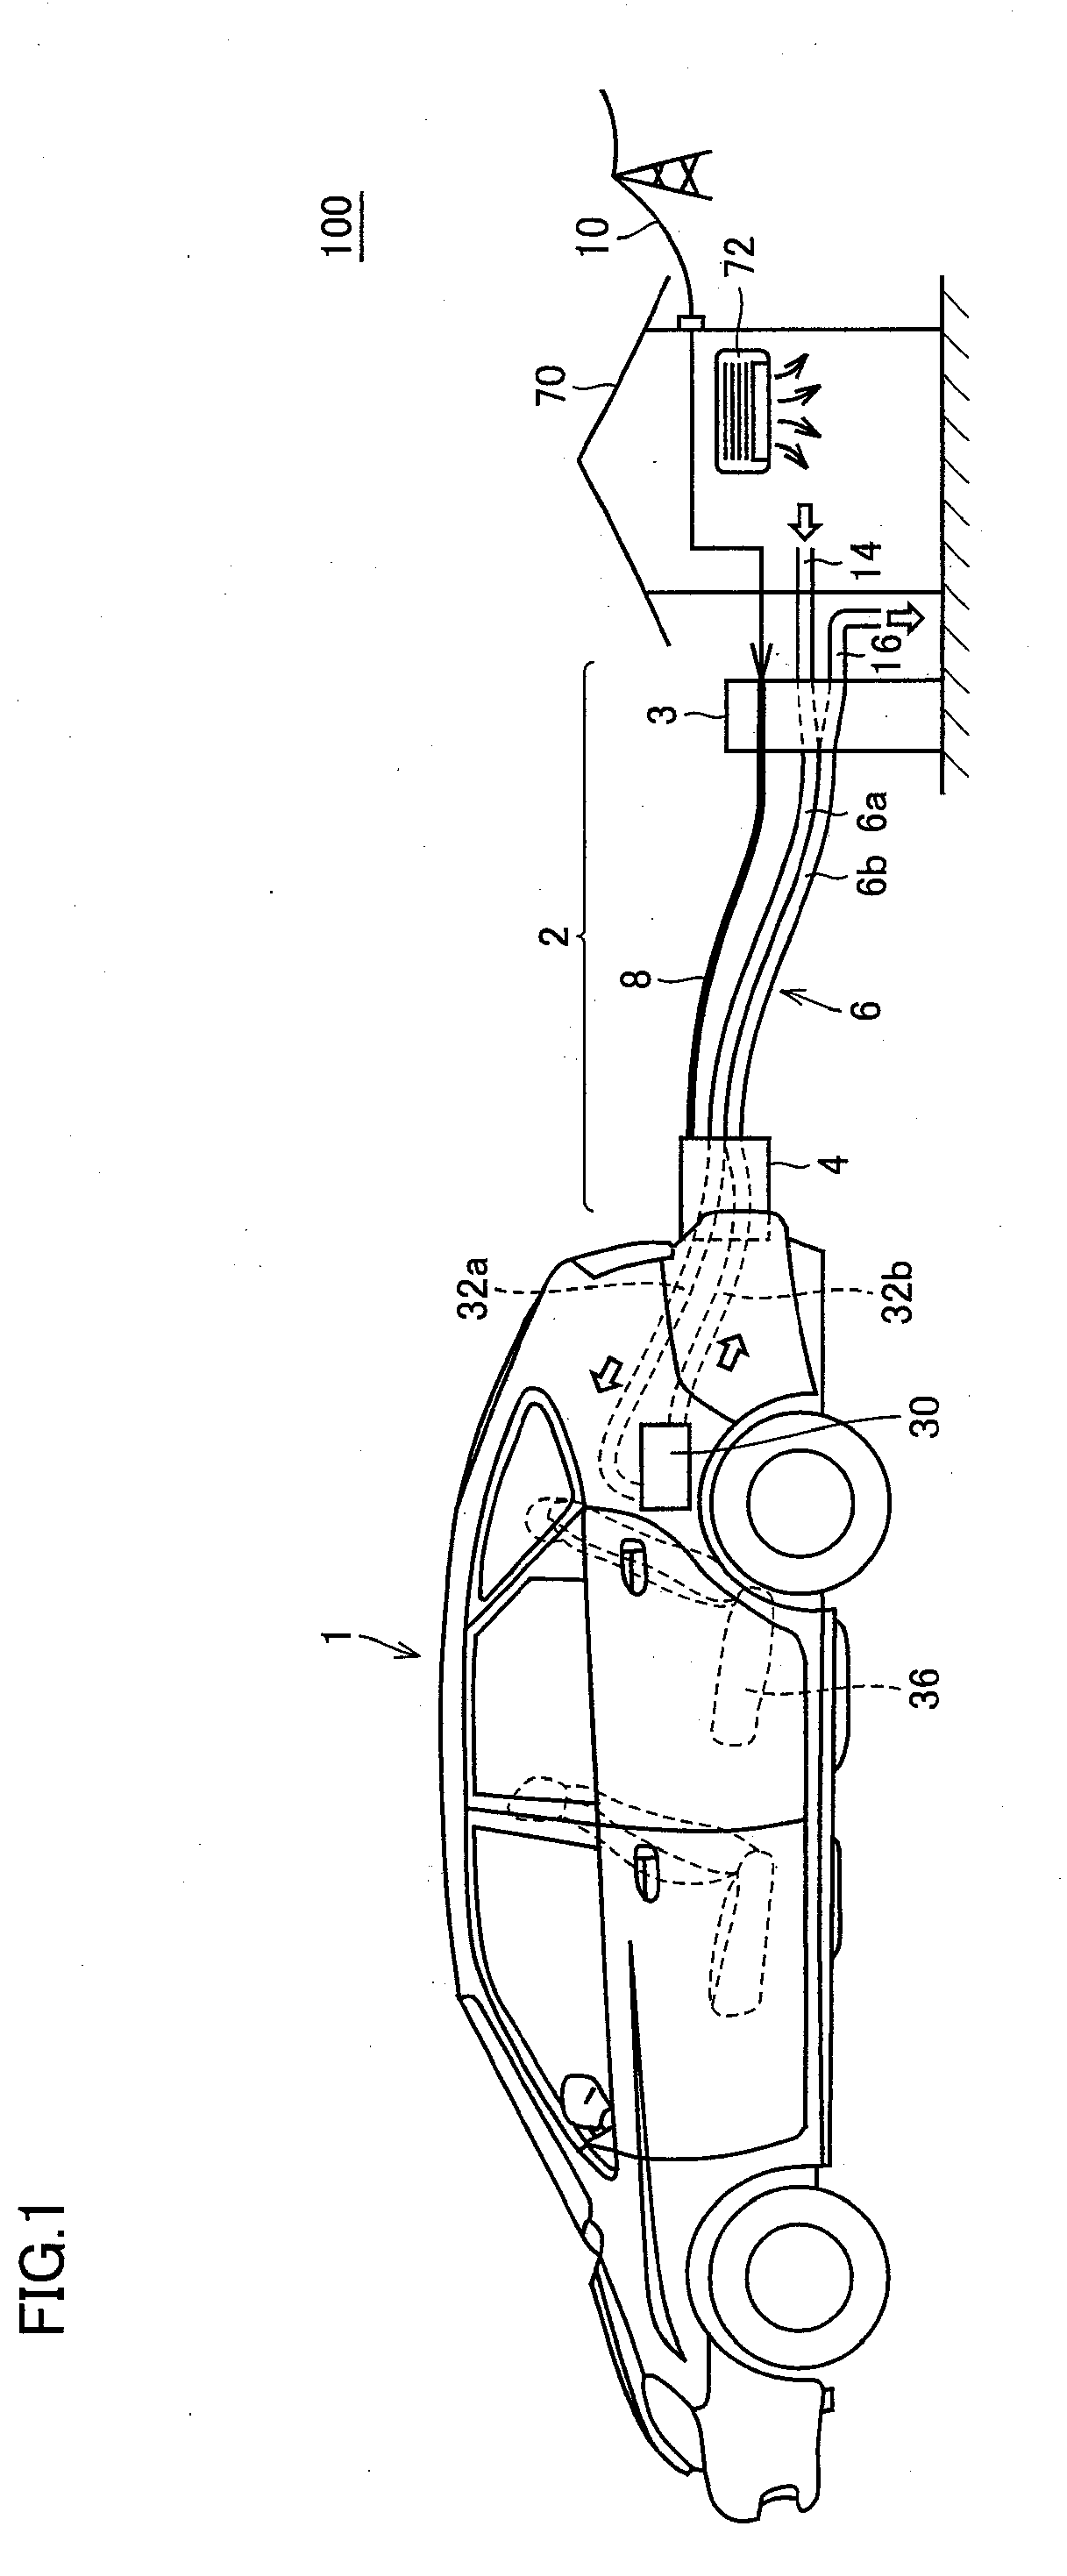 Electric vehicle and vehicle charging system